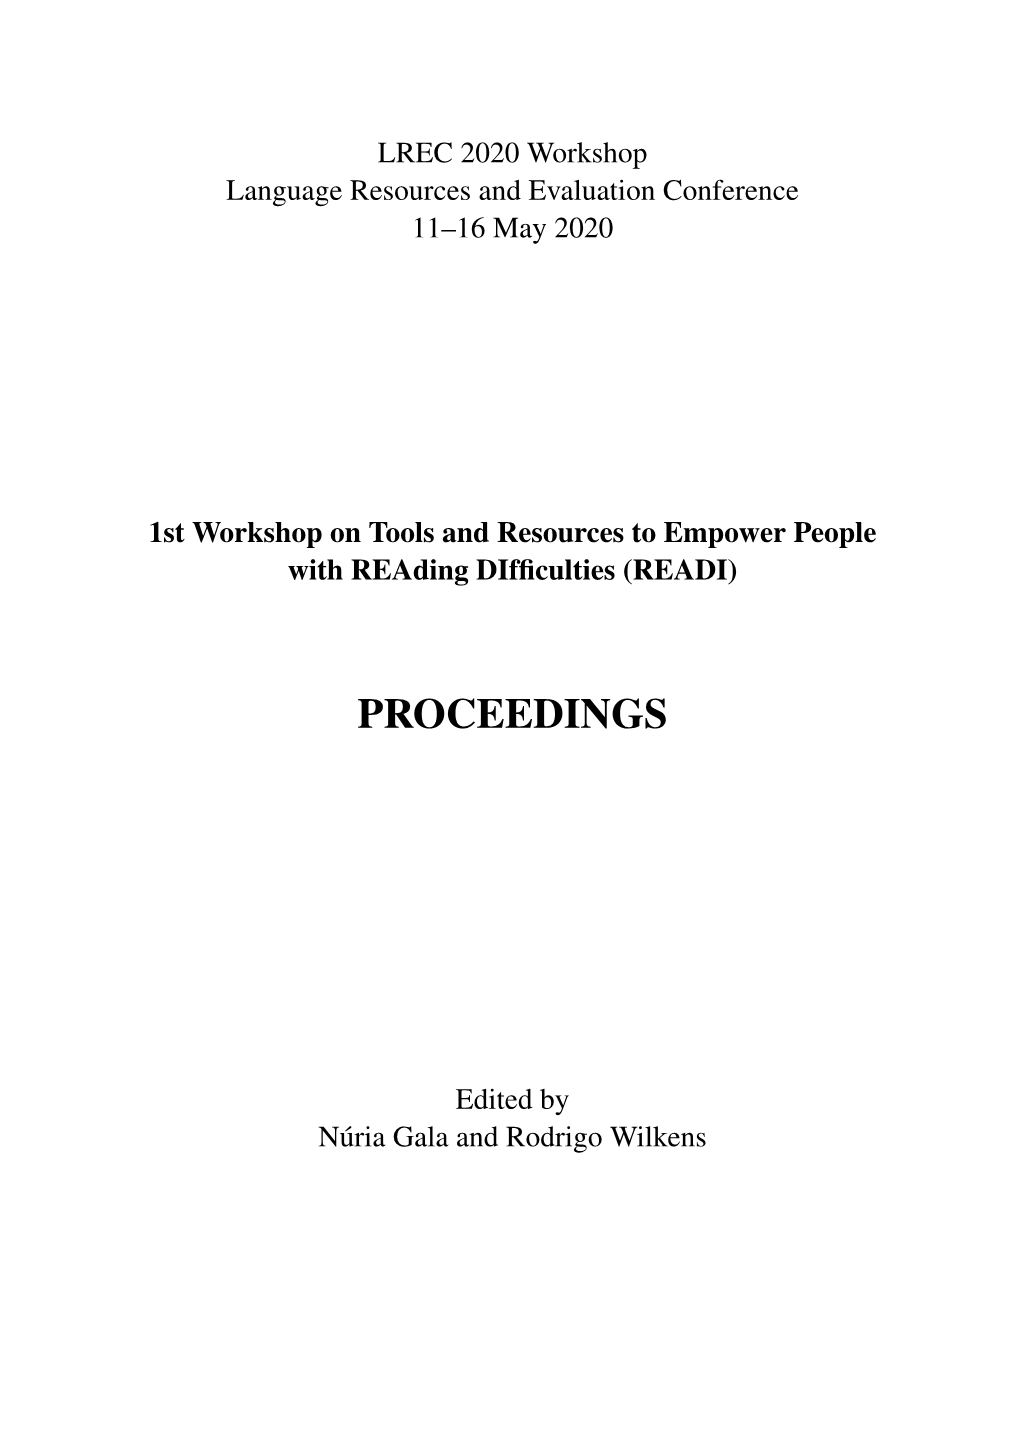 Proceedings of the 1St Workshop on Tools and Resources to Empower